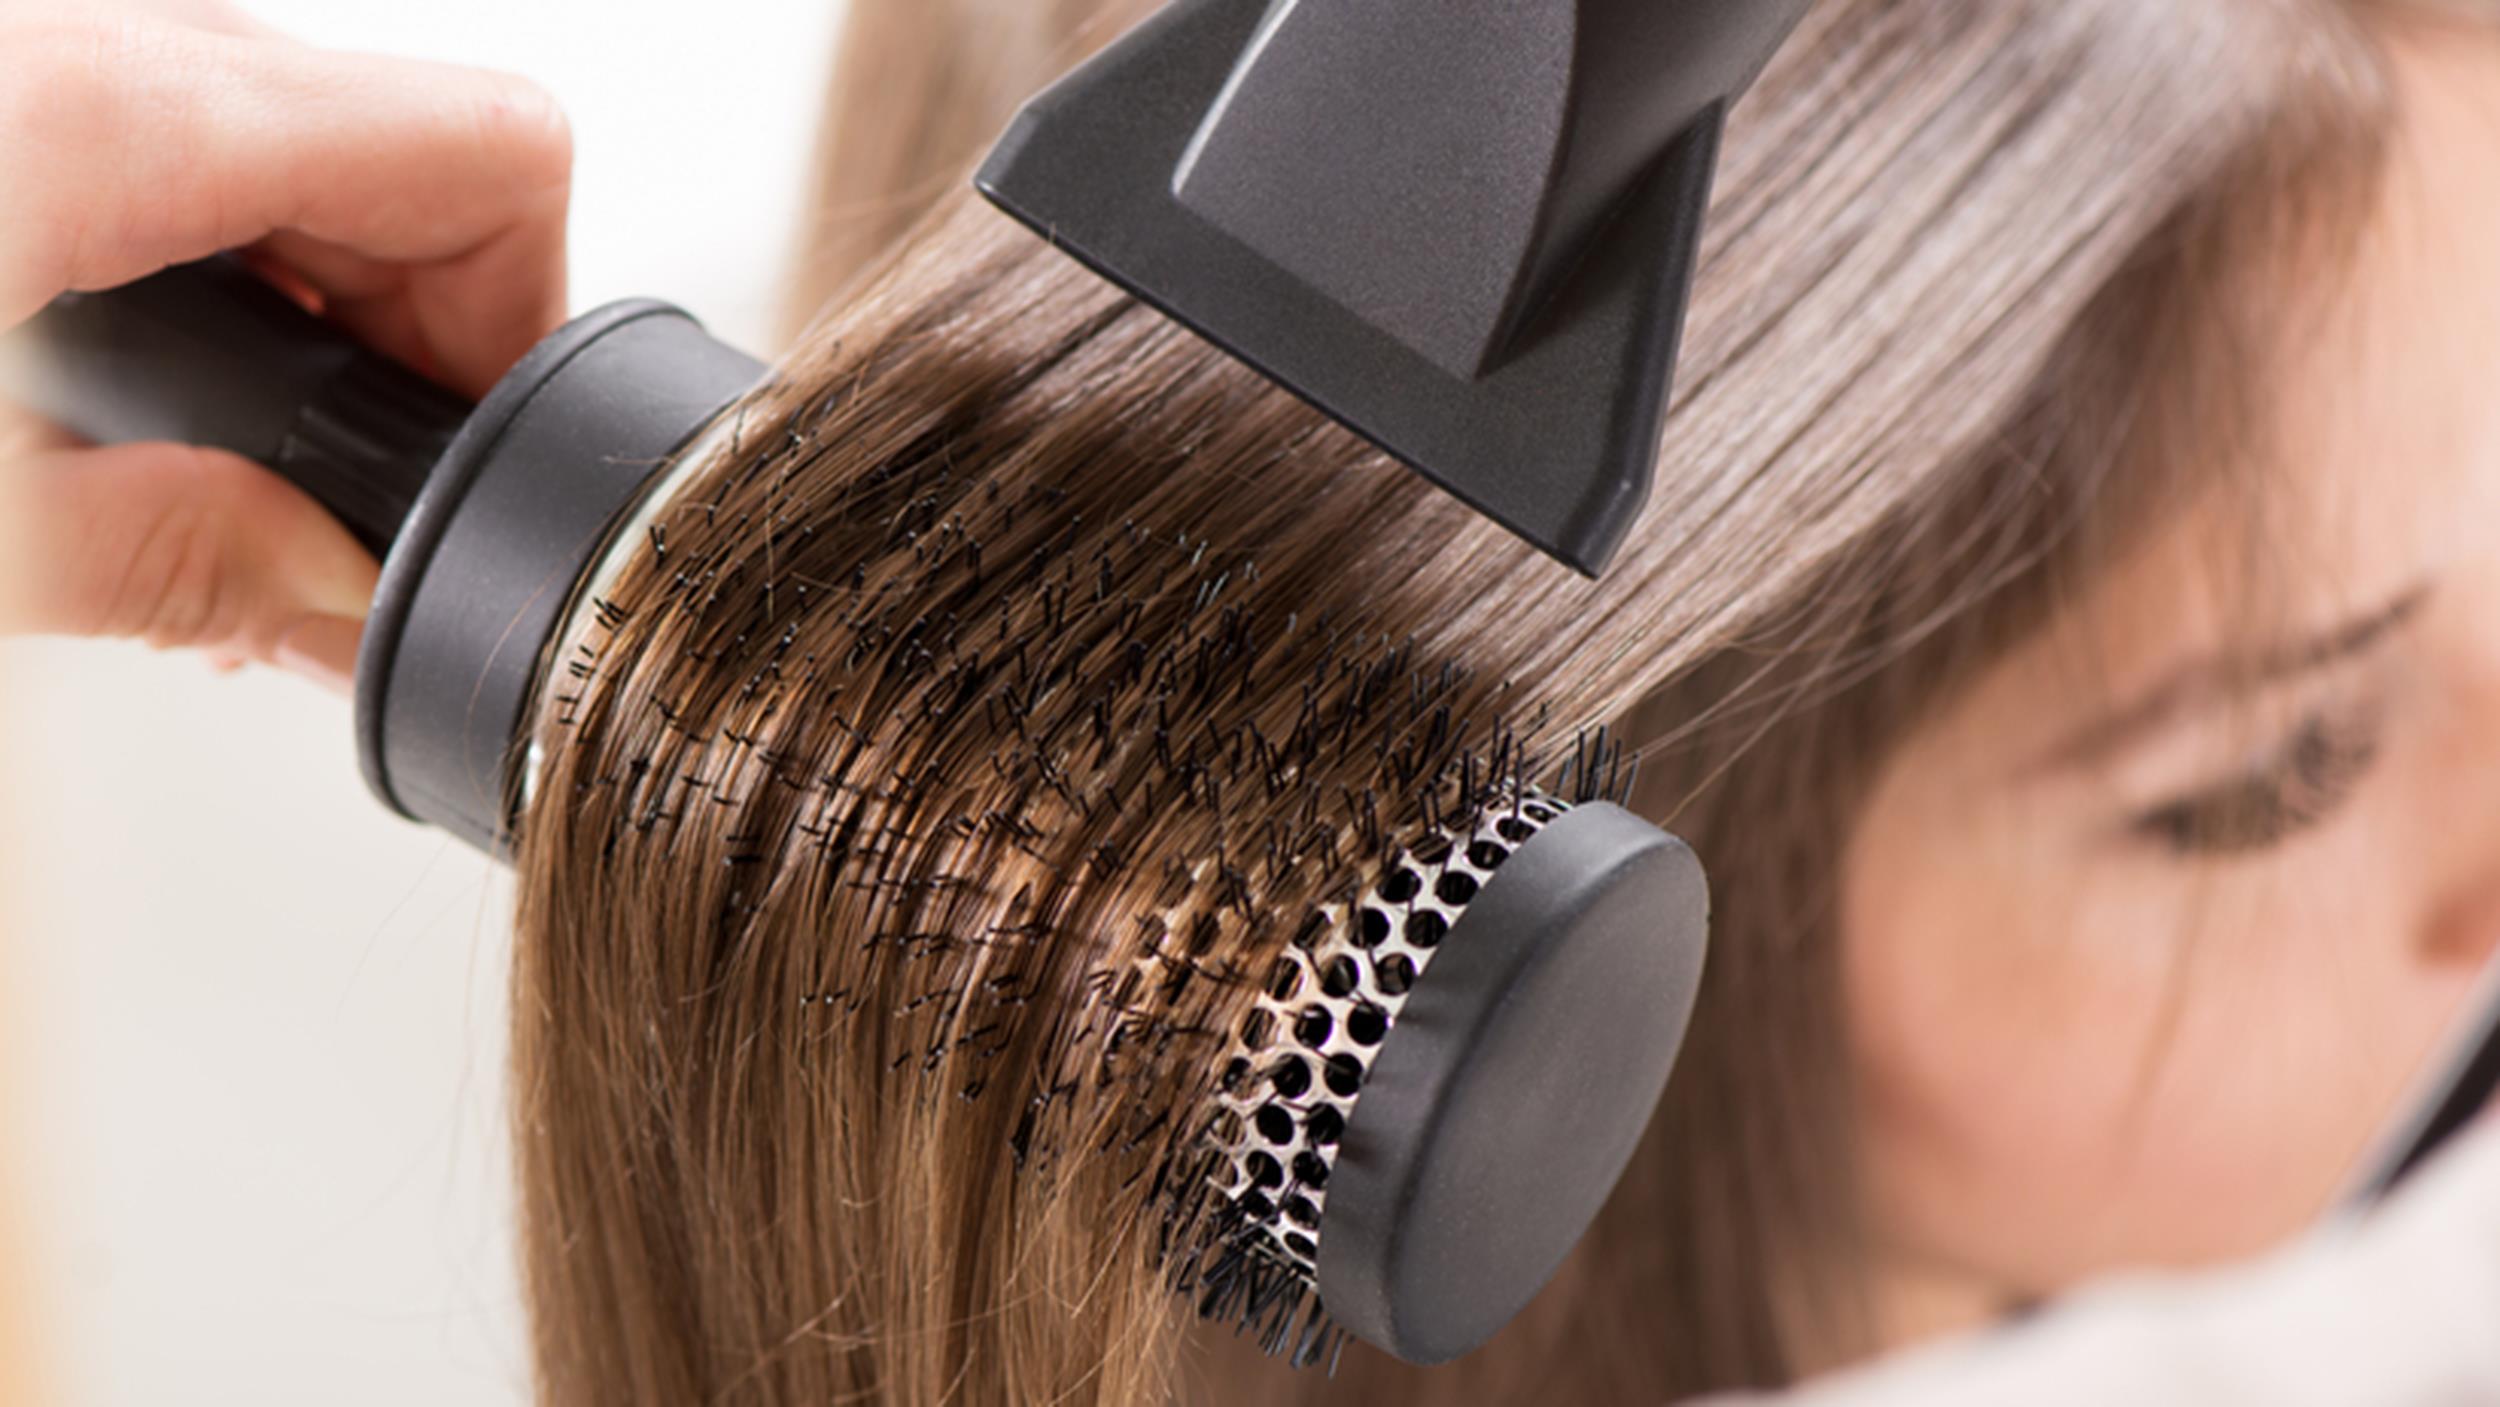 How To Do A Blowout With A Hair Dryer